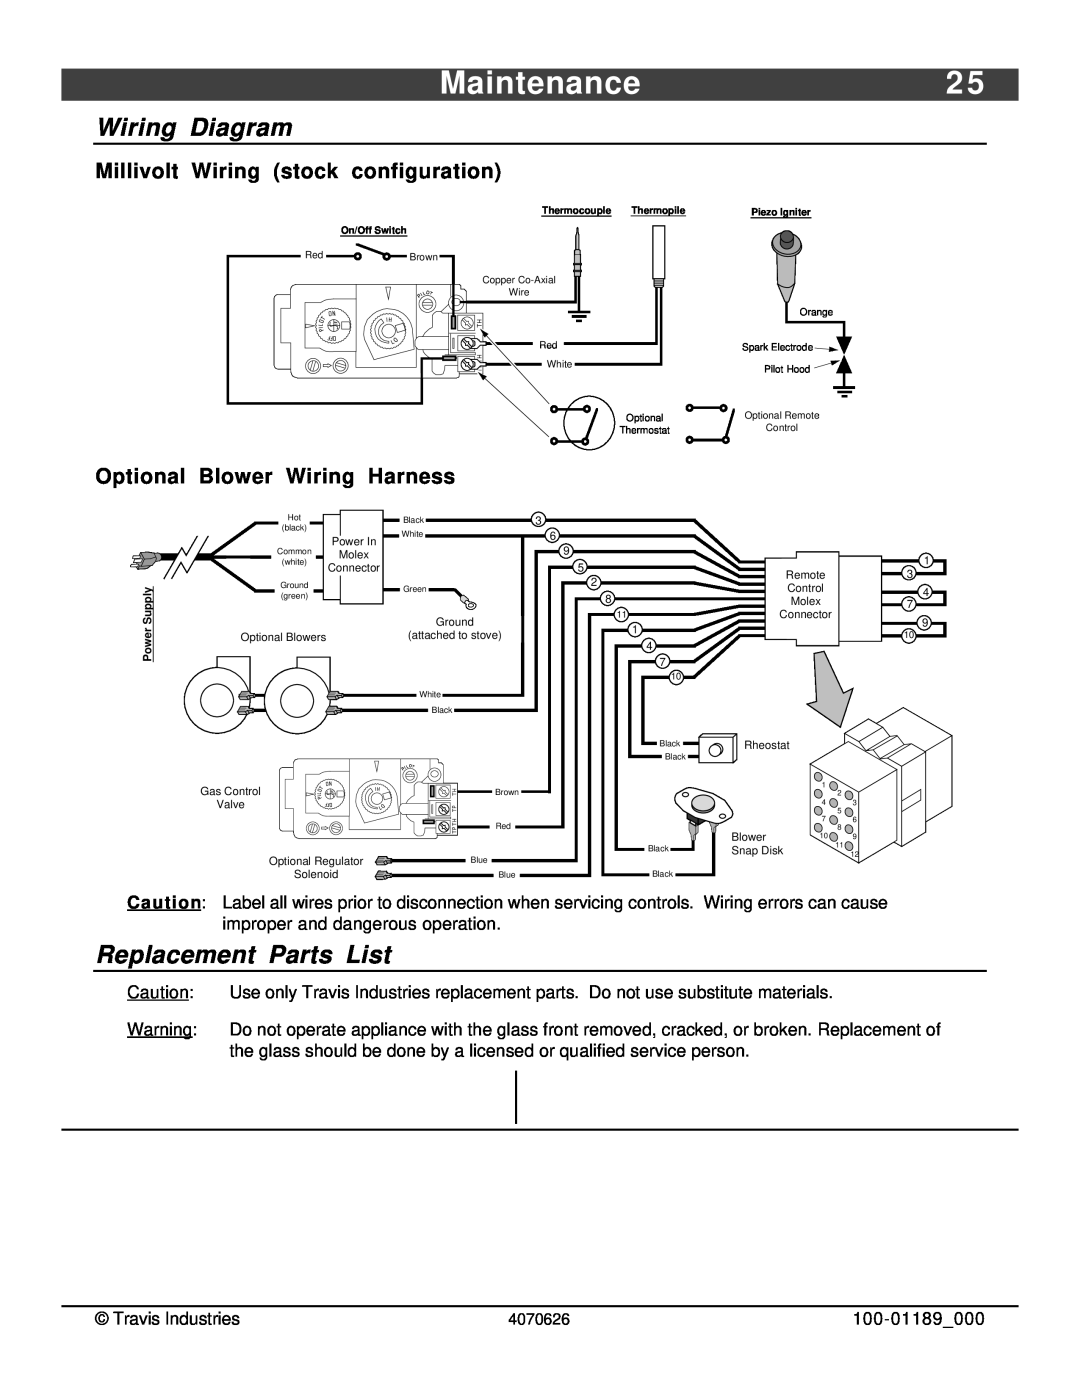 Omnitron Systems Technology 564 SS Wiring Diagram, Replacement Parts List, Maintenance2, Optional Blower Wiring Harness 